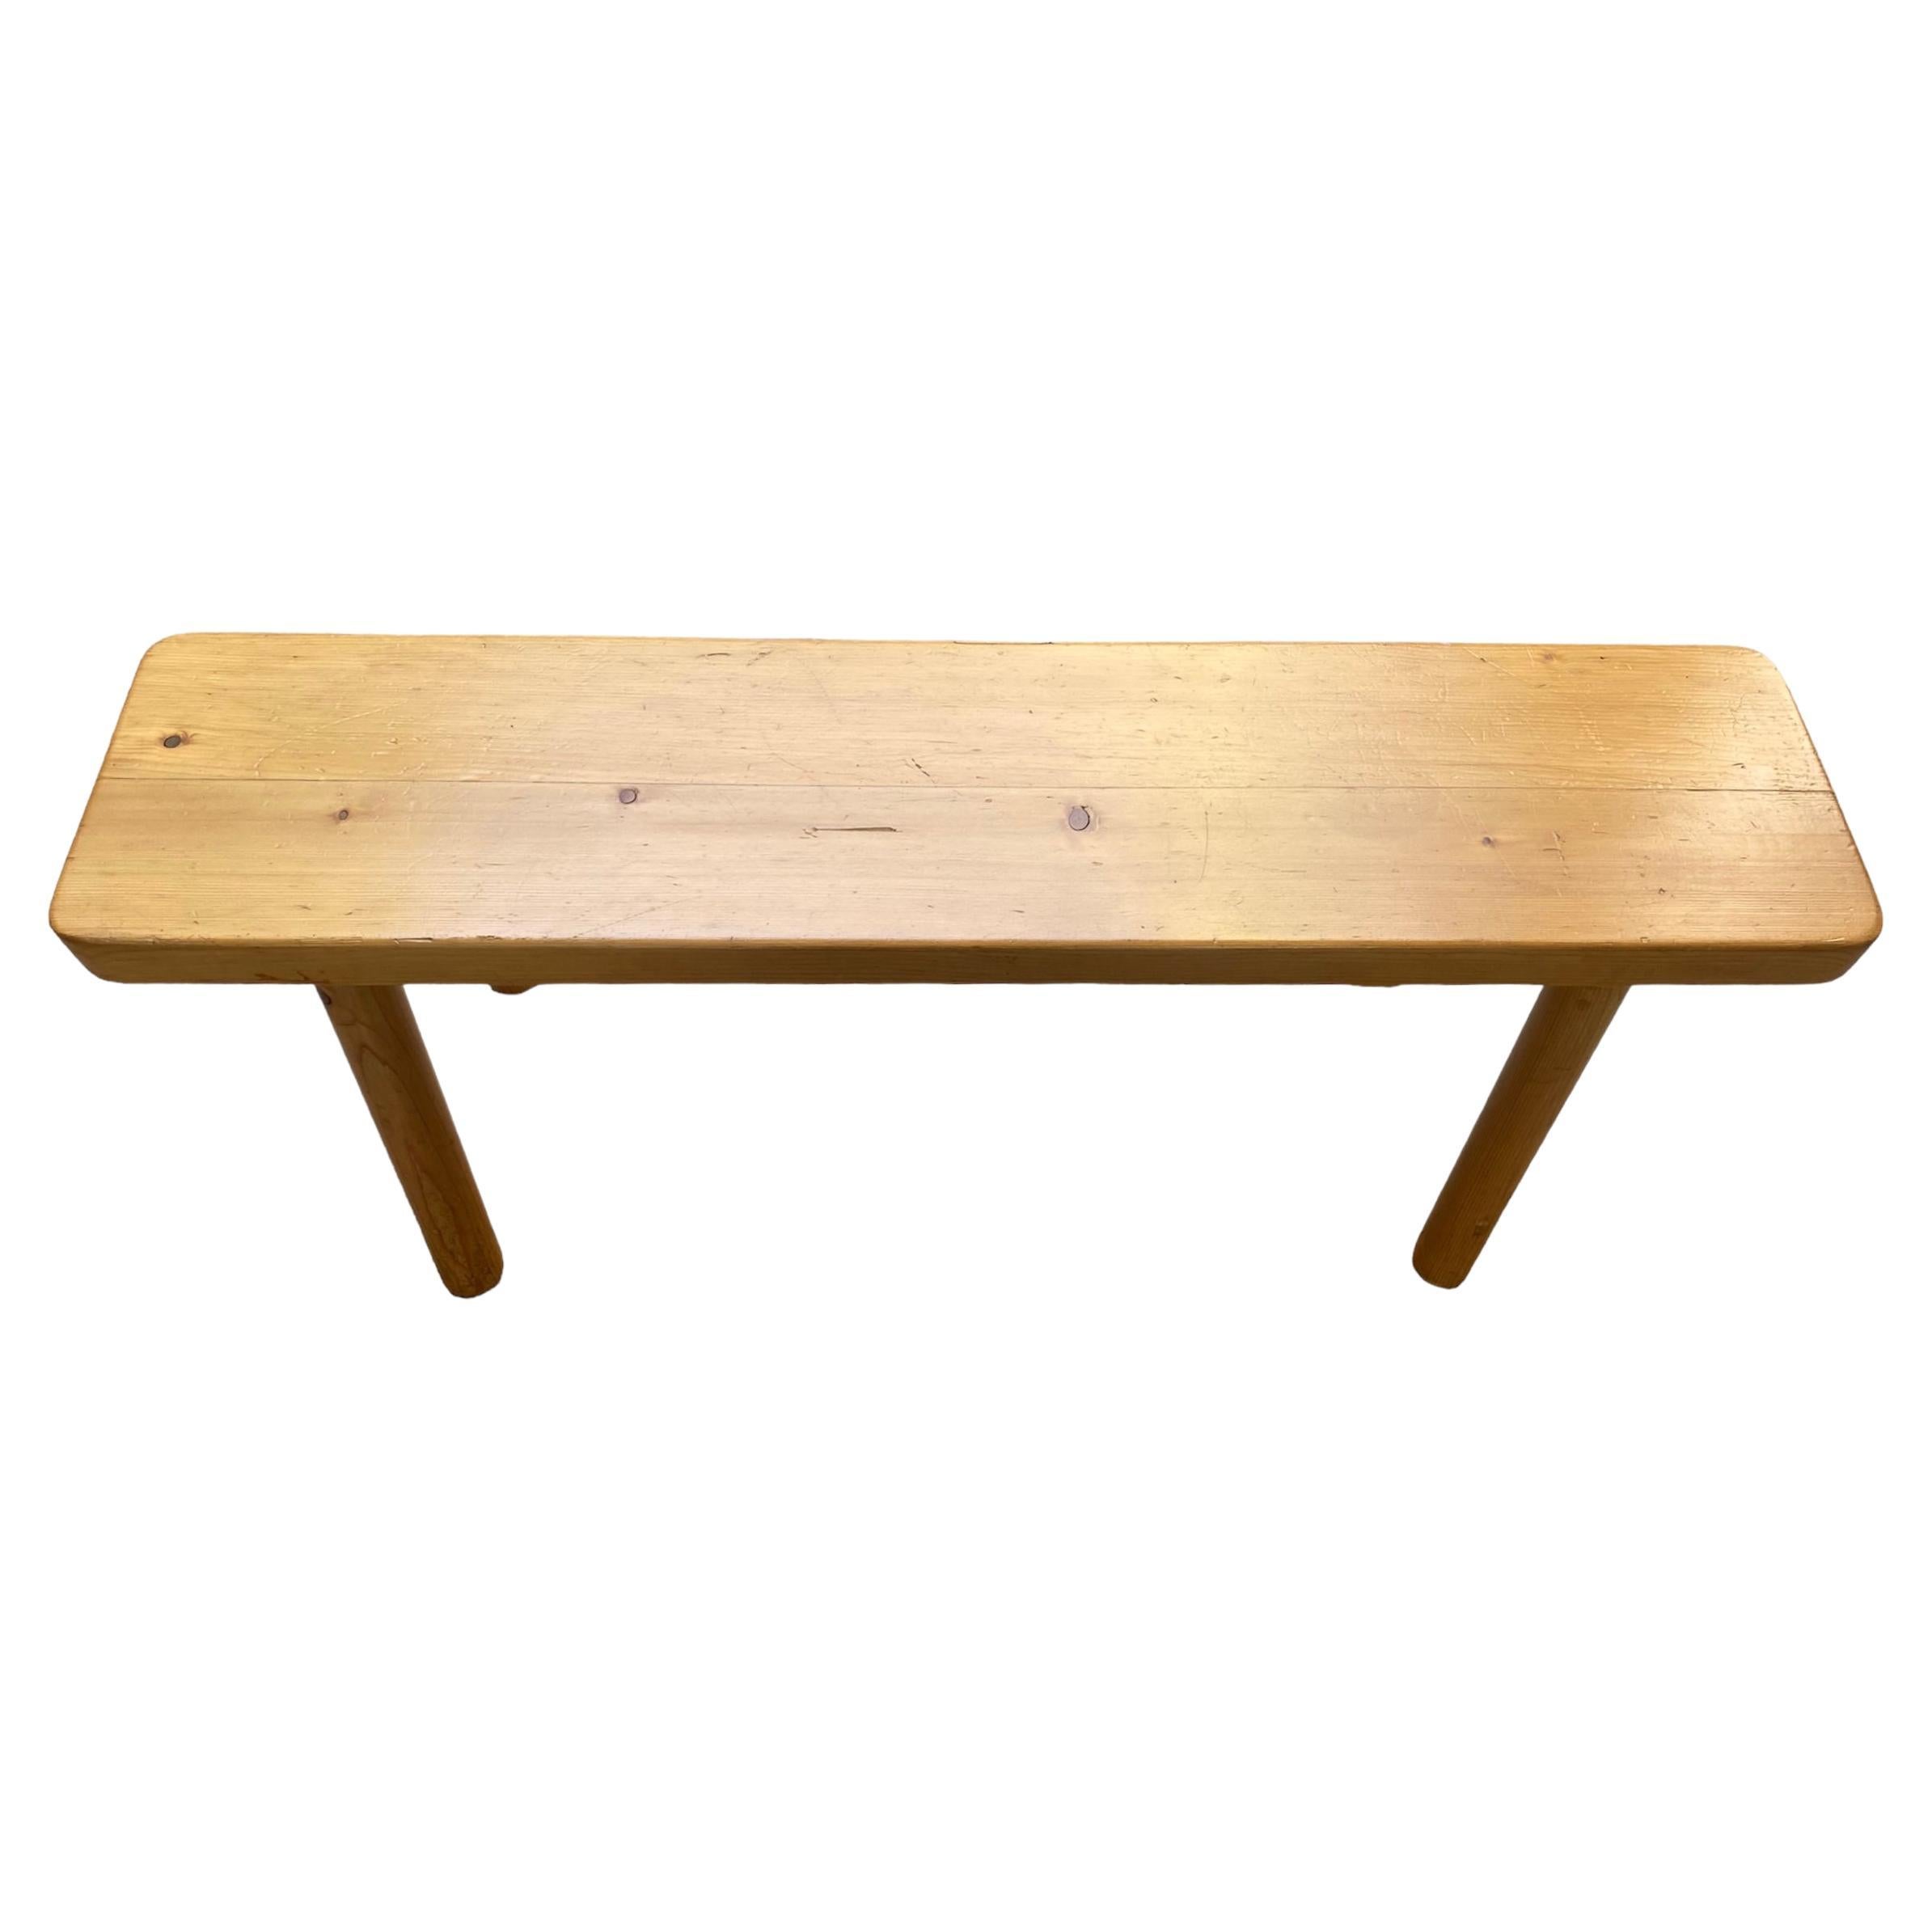 Bench René Martin for Charlotte Perriand - Circa 1965 For Sale